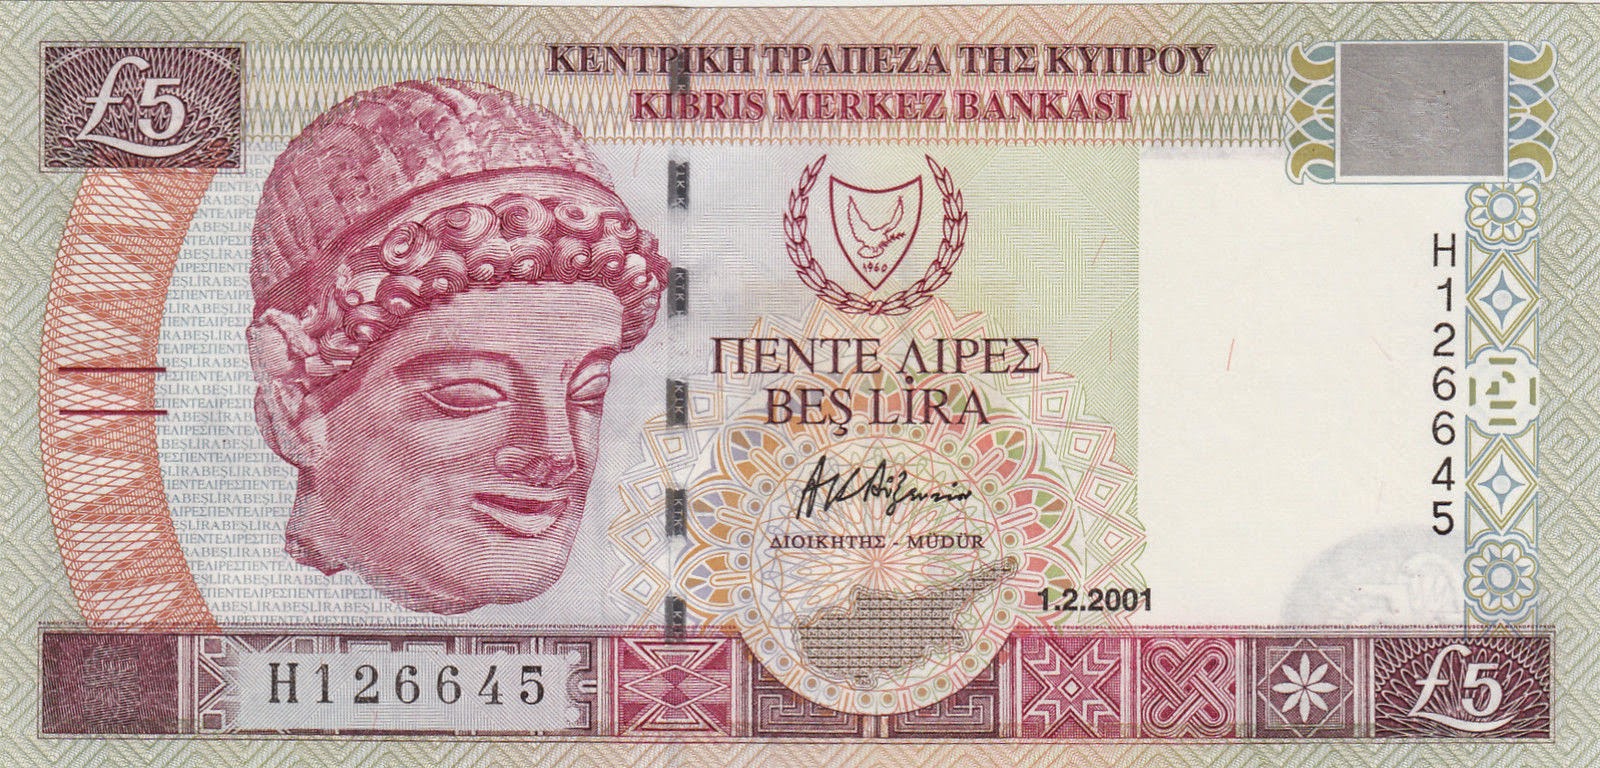 Cyprus 5 Pounds banknote 2001|World Banknotes & Coins Pictures | Old ...
